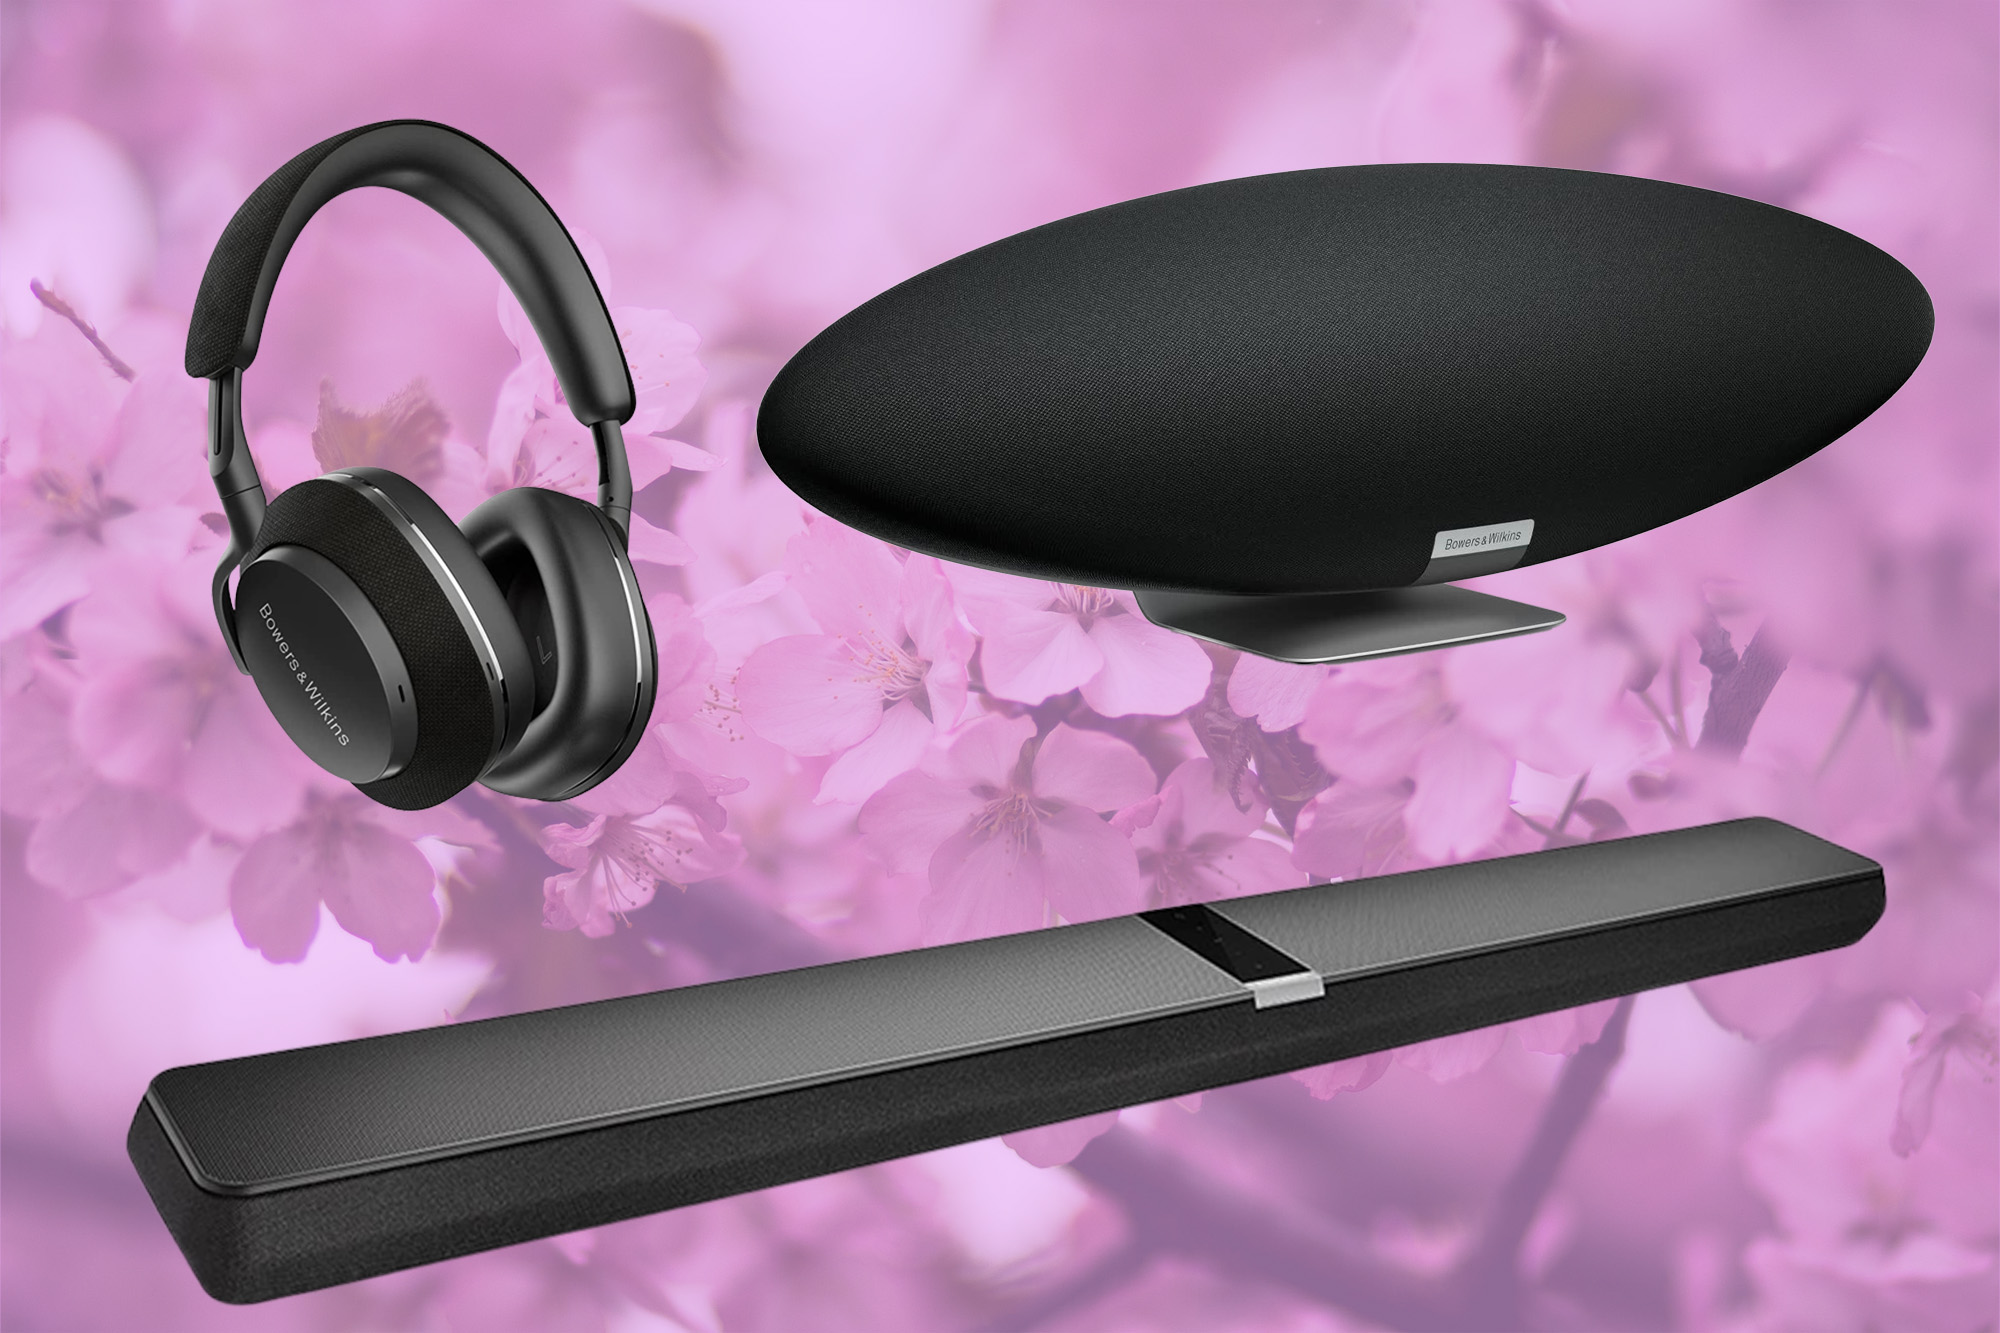 Spring into sound with Bowers & Wilkins March Audio Month deals and more